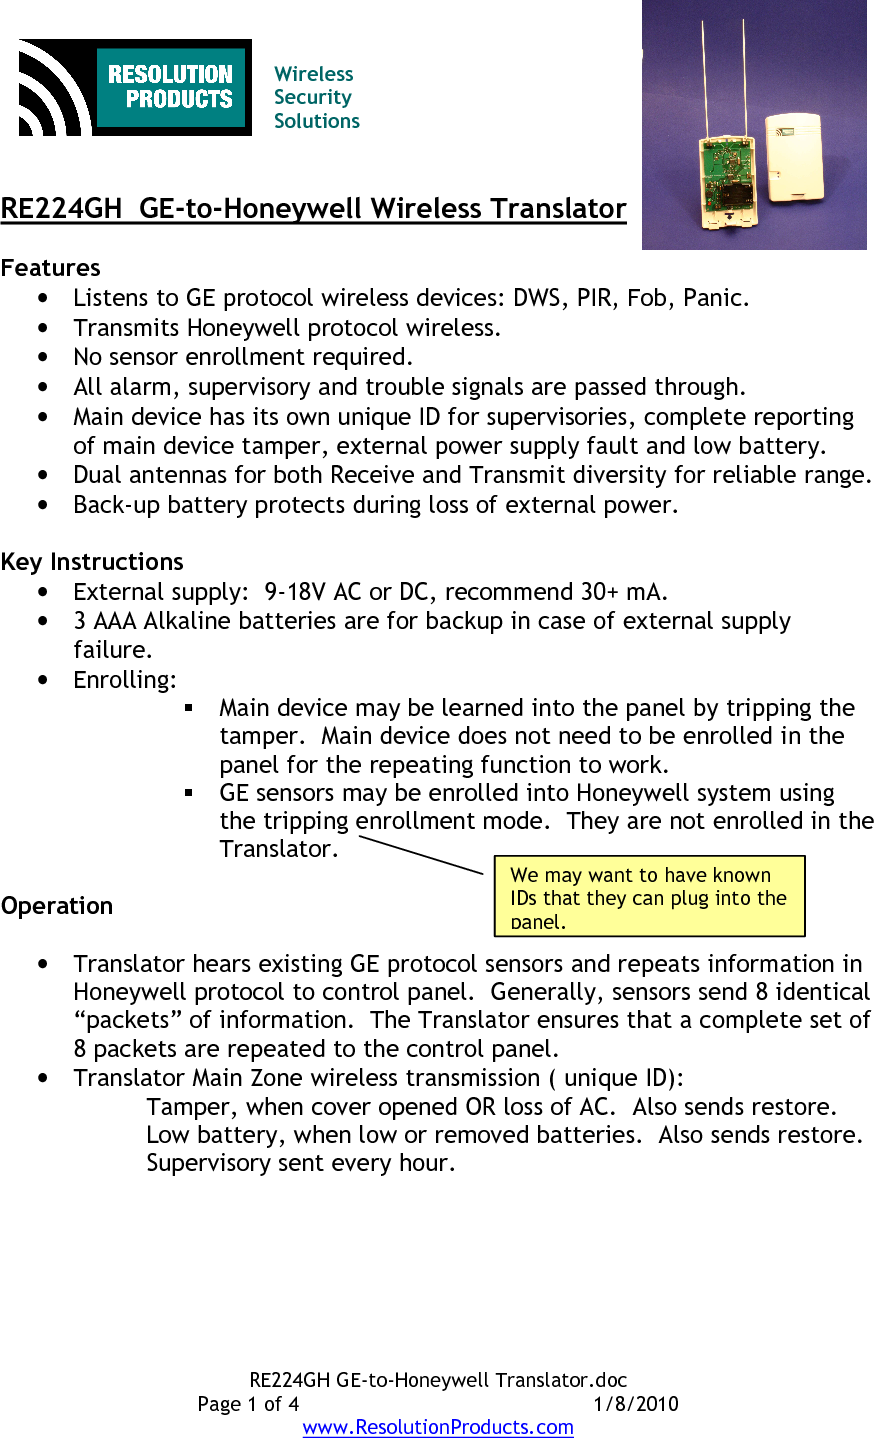 RE224GH GE-to-Honeywell Translator.doc Page 1 of 4  1/8/2010 www.ResolutionProducts.com   Wireless  Security  Solutions   RE224GH  GE-to-Honeywell Wireless Translator  Features • Listens to GE protocol wireless devices: DWS, PIR, Fob, Panic. • Transmits Honeywell protocol wireless. • No sensor enrollment required.   • All alarm, supervisory and trouble signals are passed through. • Main device has its own unique ID for supervisories, complete reporting of main device tamper, external power supply fault and low battery. • Dual antennas for both Receive and Transmit diversity for reliable range. • Back-up battery protects during loss of external power.  Key Instructions • External supply:  9-18V AC or DC, recommend 30+ mA. • 3 AAA Alkaline batteries are for backup in case of external supply failure.  • Enrolling:  Main device may be learned into the panel by tripping the tamper.  Main device does not need to be enrolled in the panel for the repeating function to work.    GE sensors may be enrolled into Honeywell system using the tripping enrollment mode.  They are not enrolled in the Translator.  Operation  • Translator hears existing GE protocol sensors and repeats information in Honeywell protocol to control panel.  Generally, sensors send 8 identical “packets” of information.  The Translator ensures that a complete set of 8 packets are repeated to the control panel. • Translator Main Zone wireless transmission ( unique ID): Tamper, when cover opened OR loss of AC.  Also sends restore. Low battery, when low or removed batteries.  Also sends restore. Supervisory sent every hour. We may want to have known IDs that they can plug into the panel. 